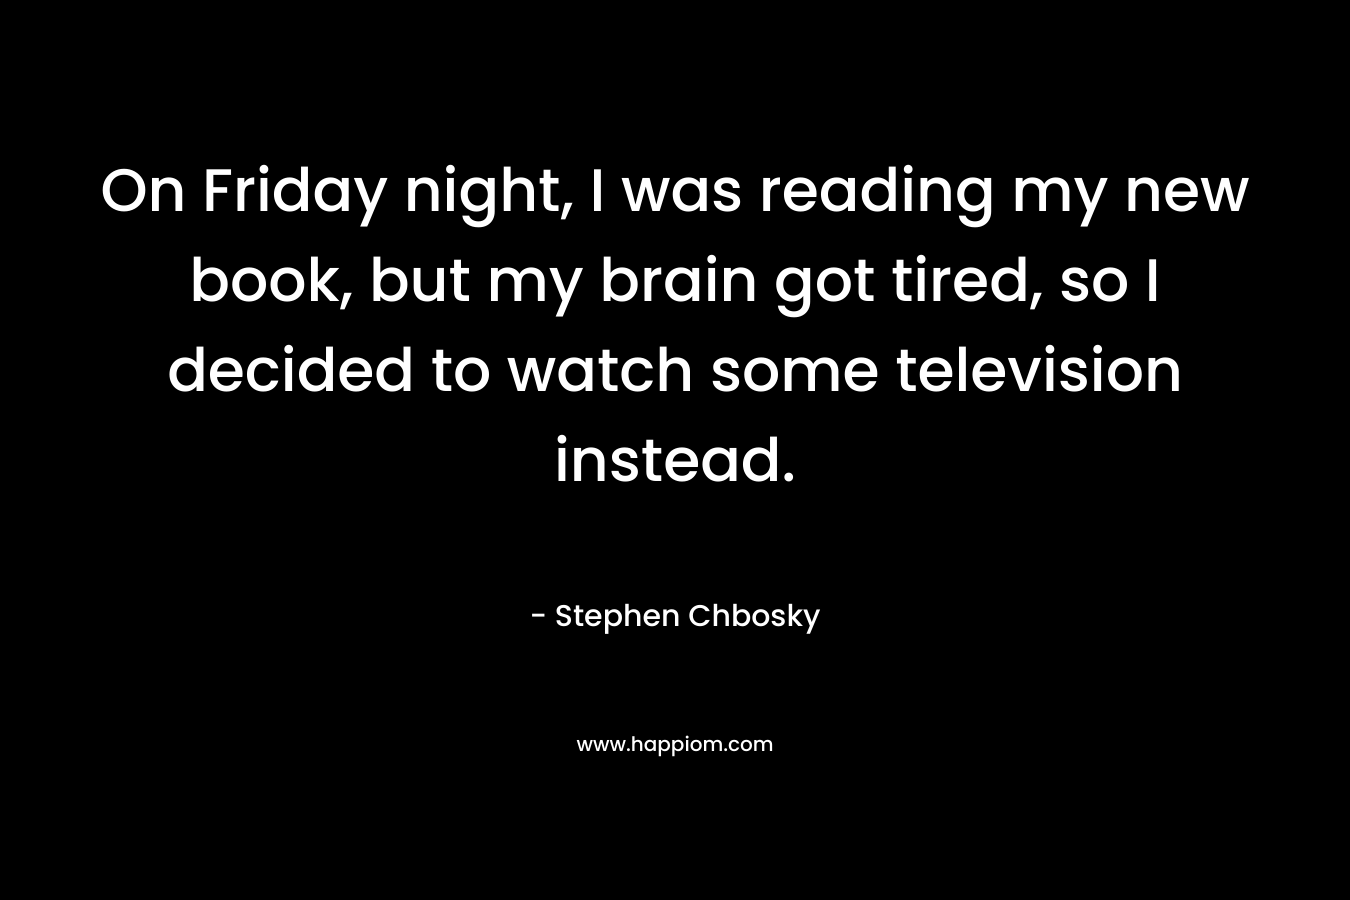 On Friday night, I was reading my new book, but my brain got tired, so I decided to watch some television instead.